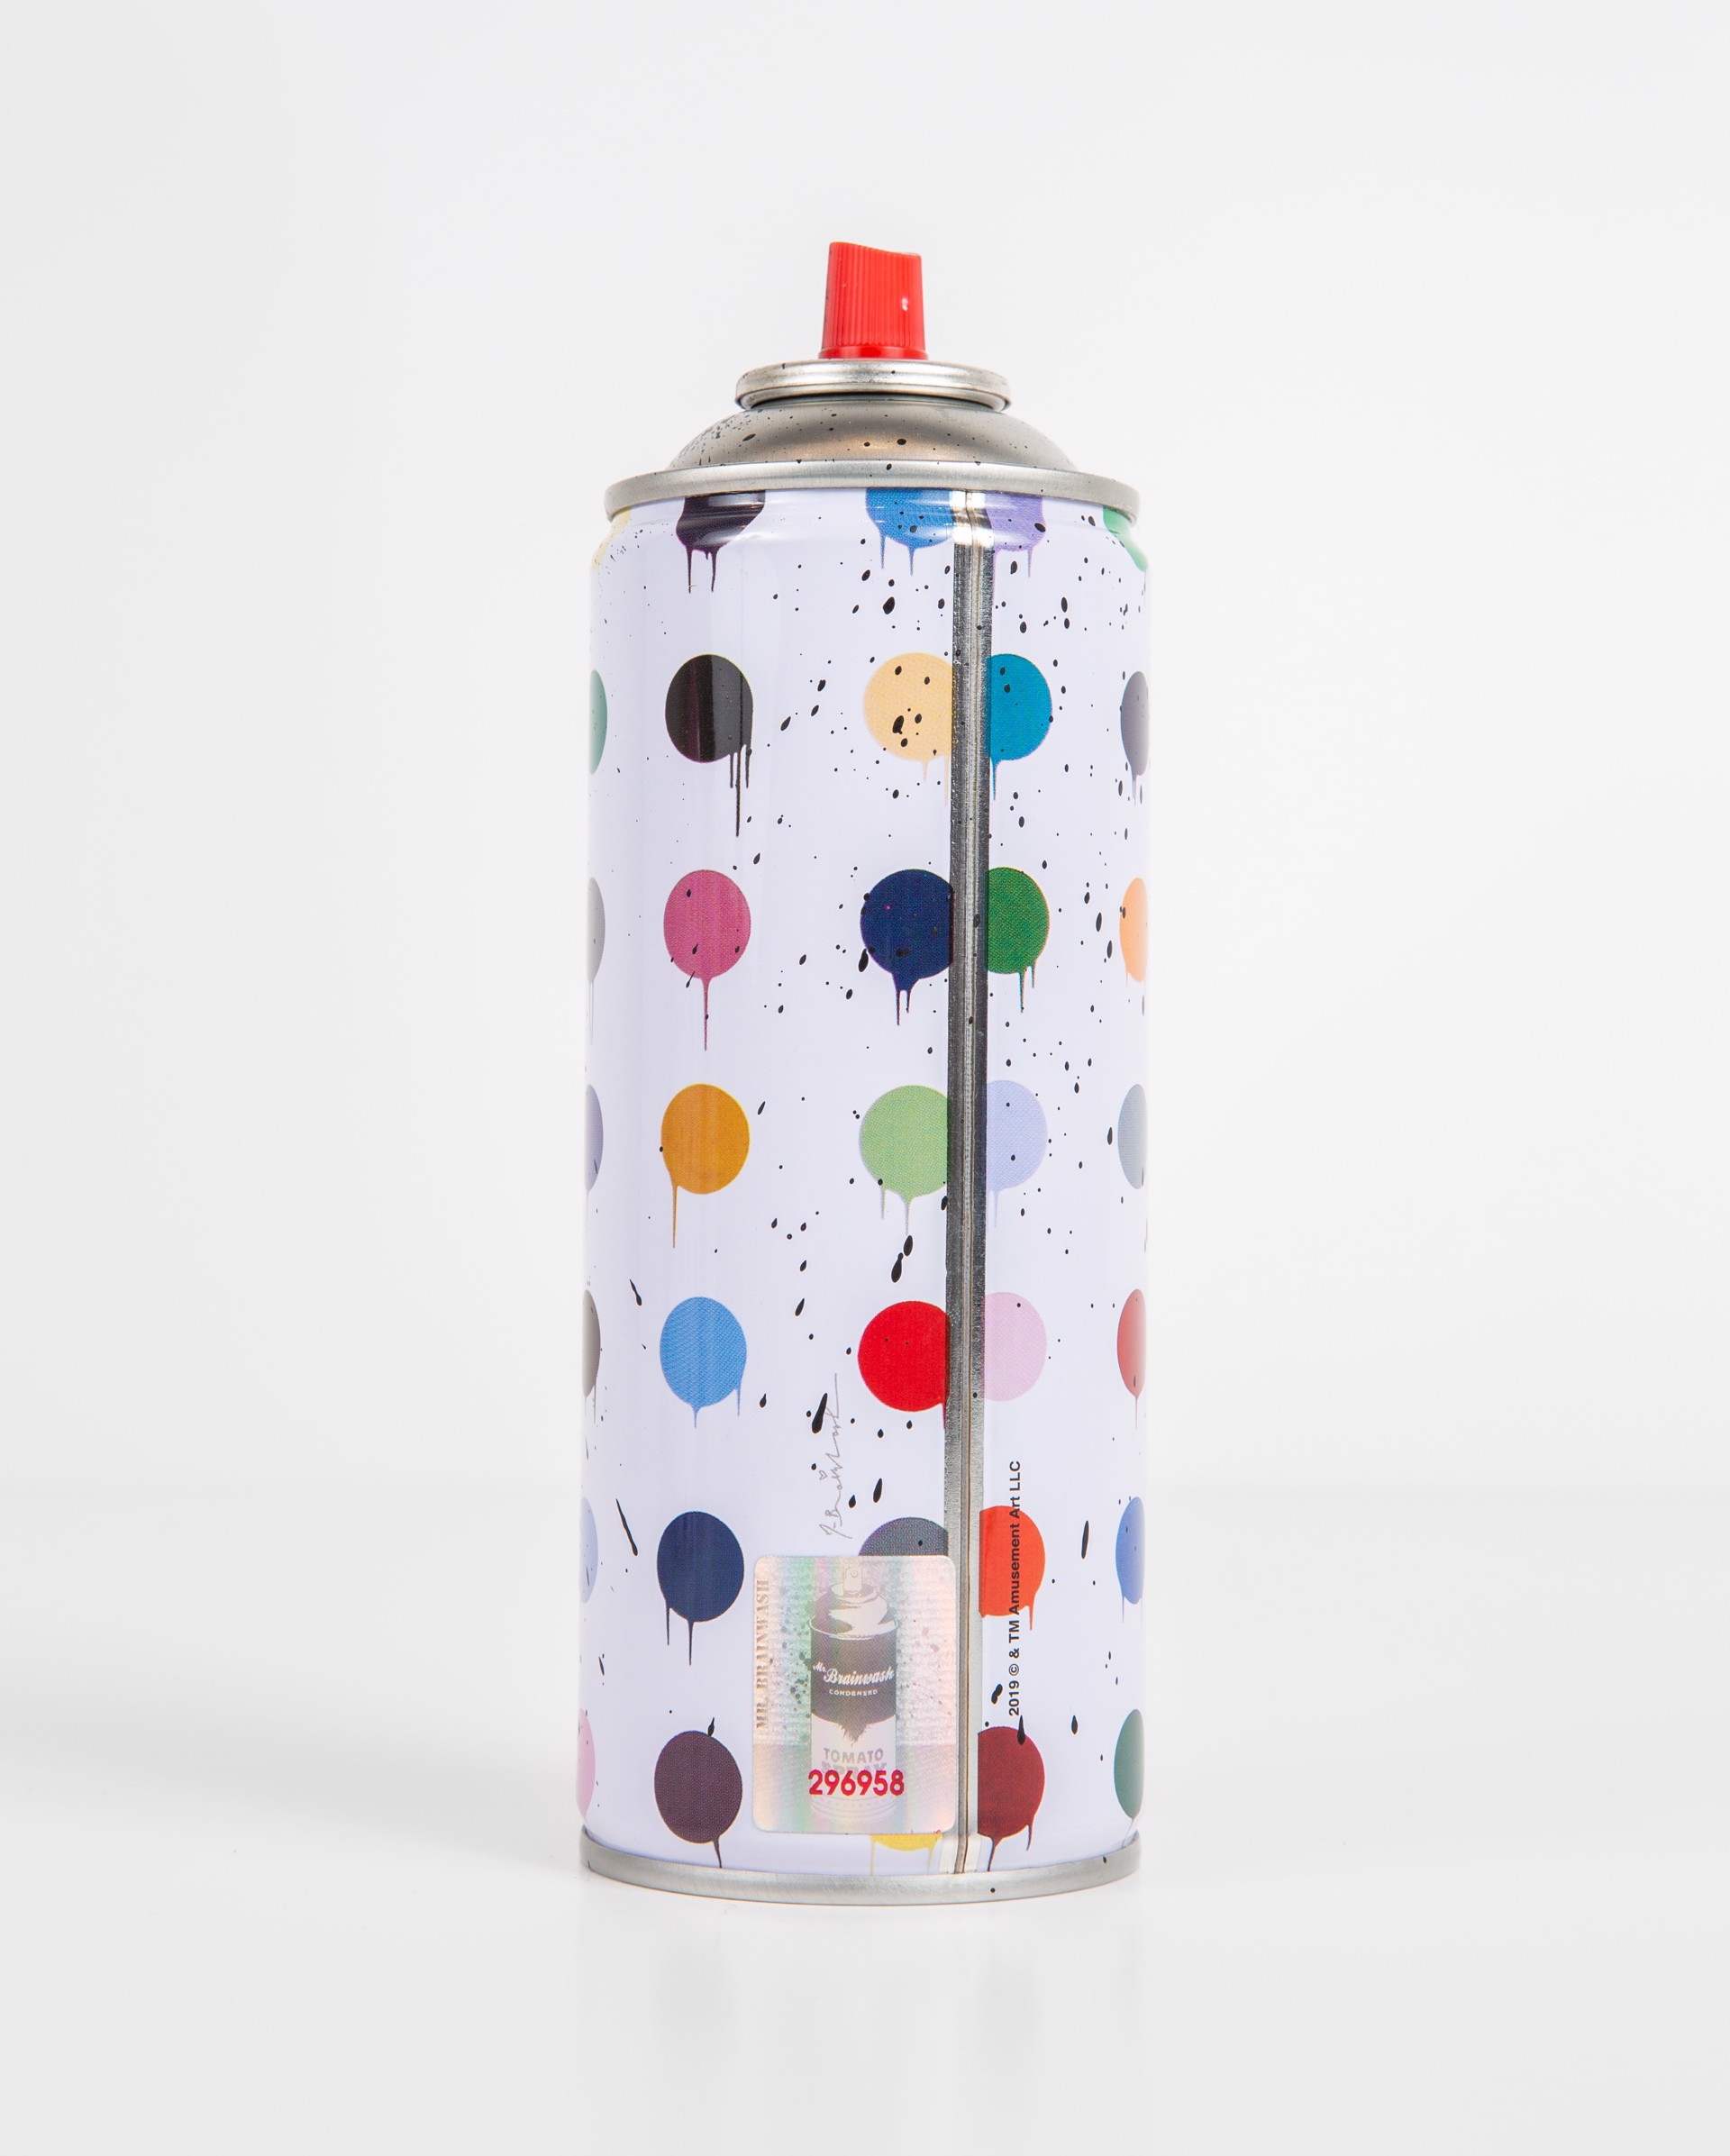 Hirst dots - Red by Mr.Brainwash